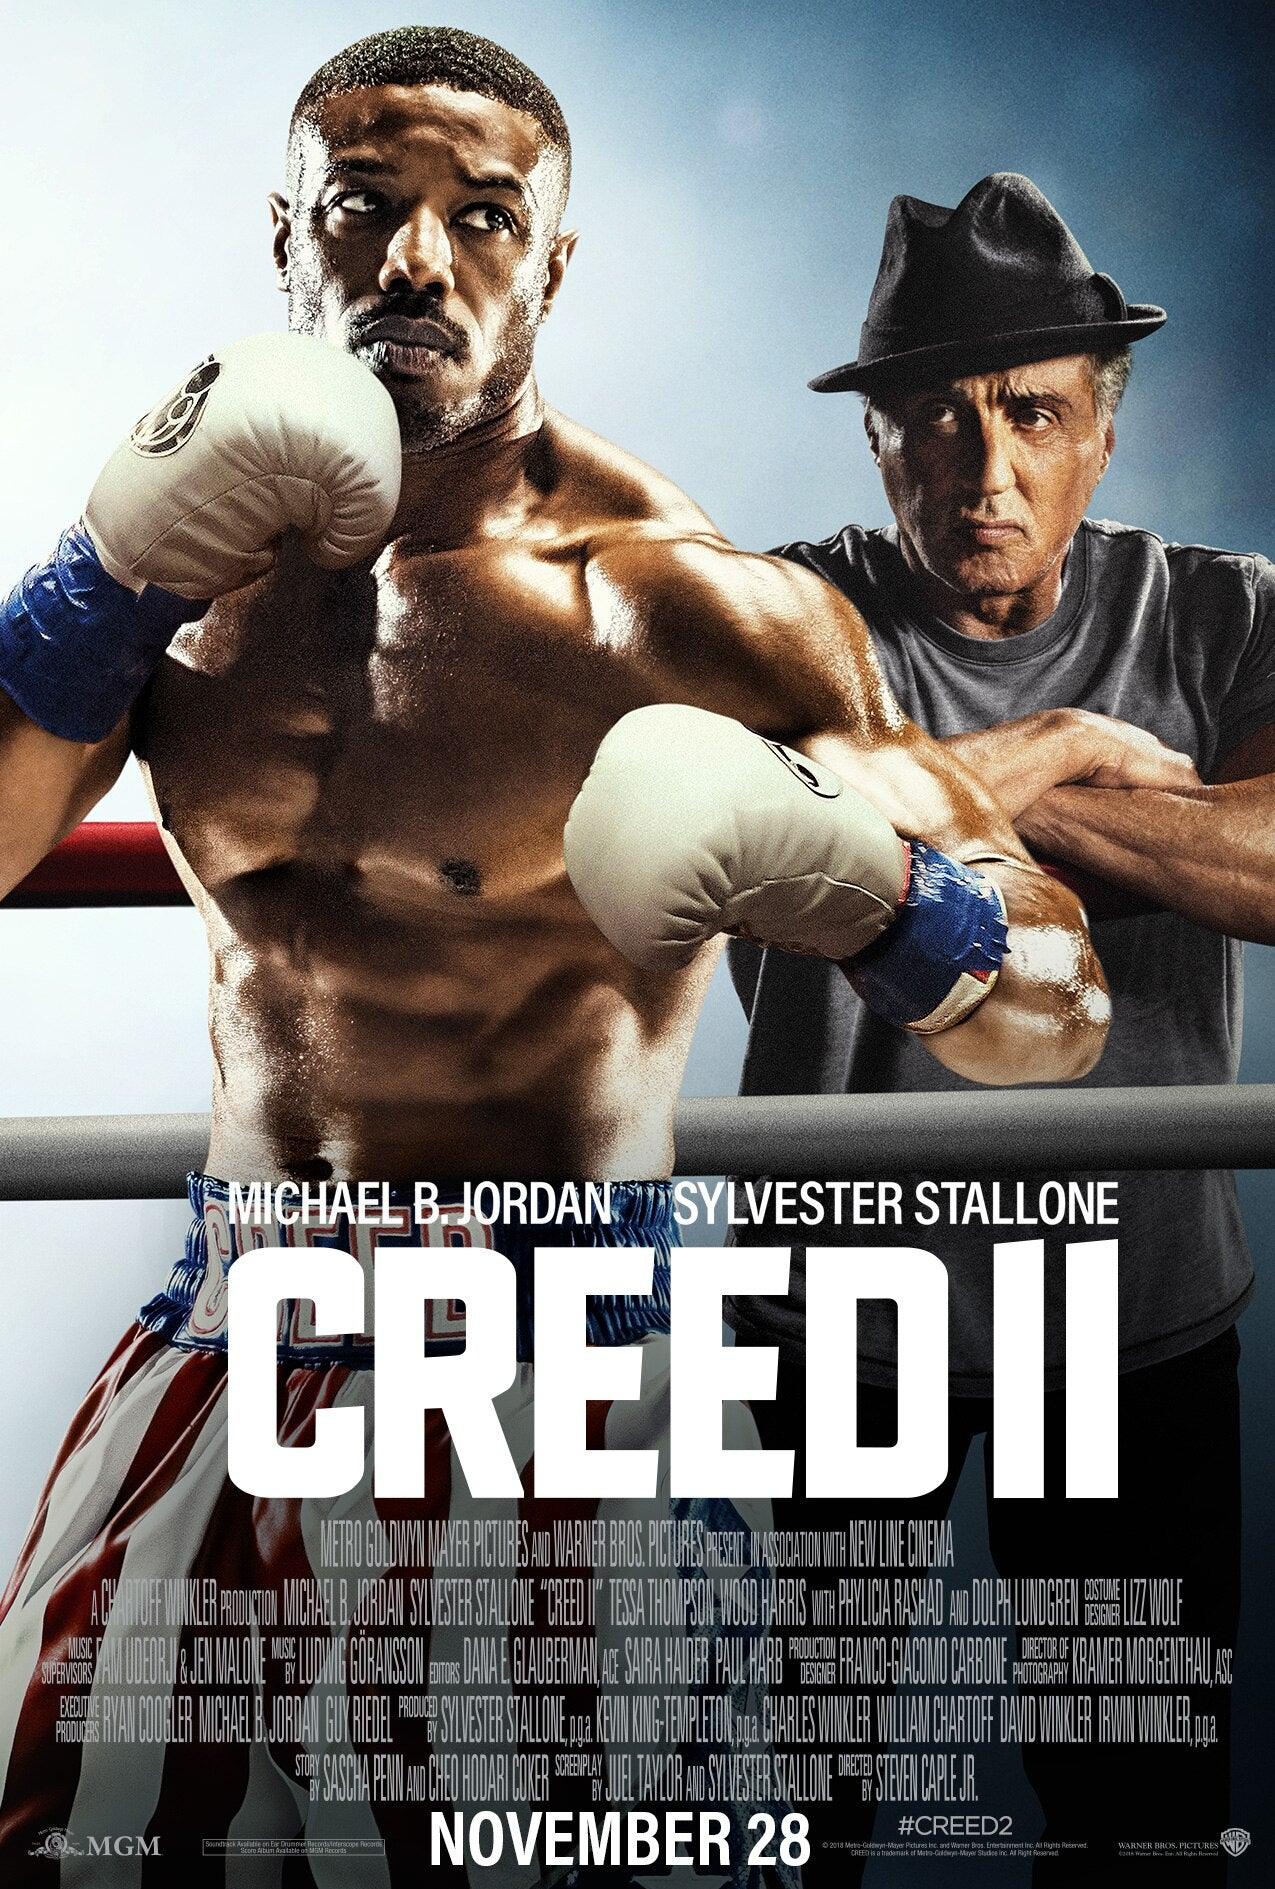 Creed II Rocky Adonis Creed Movie Poster - Aesthetic Wall Decor